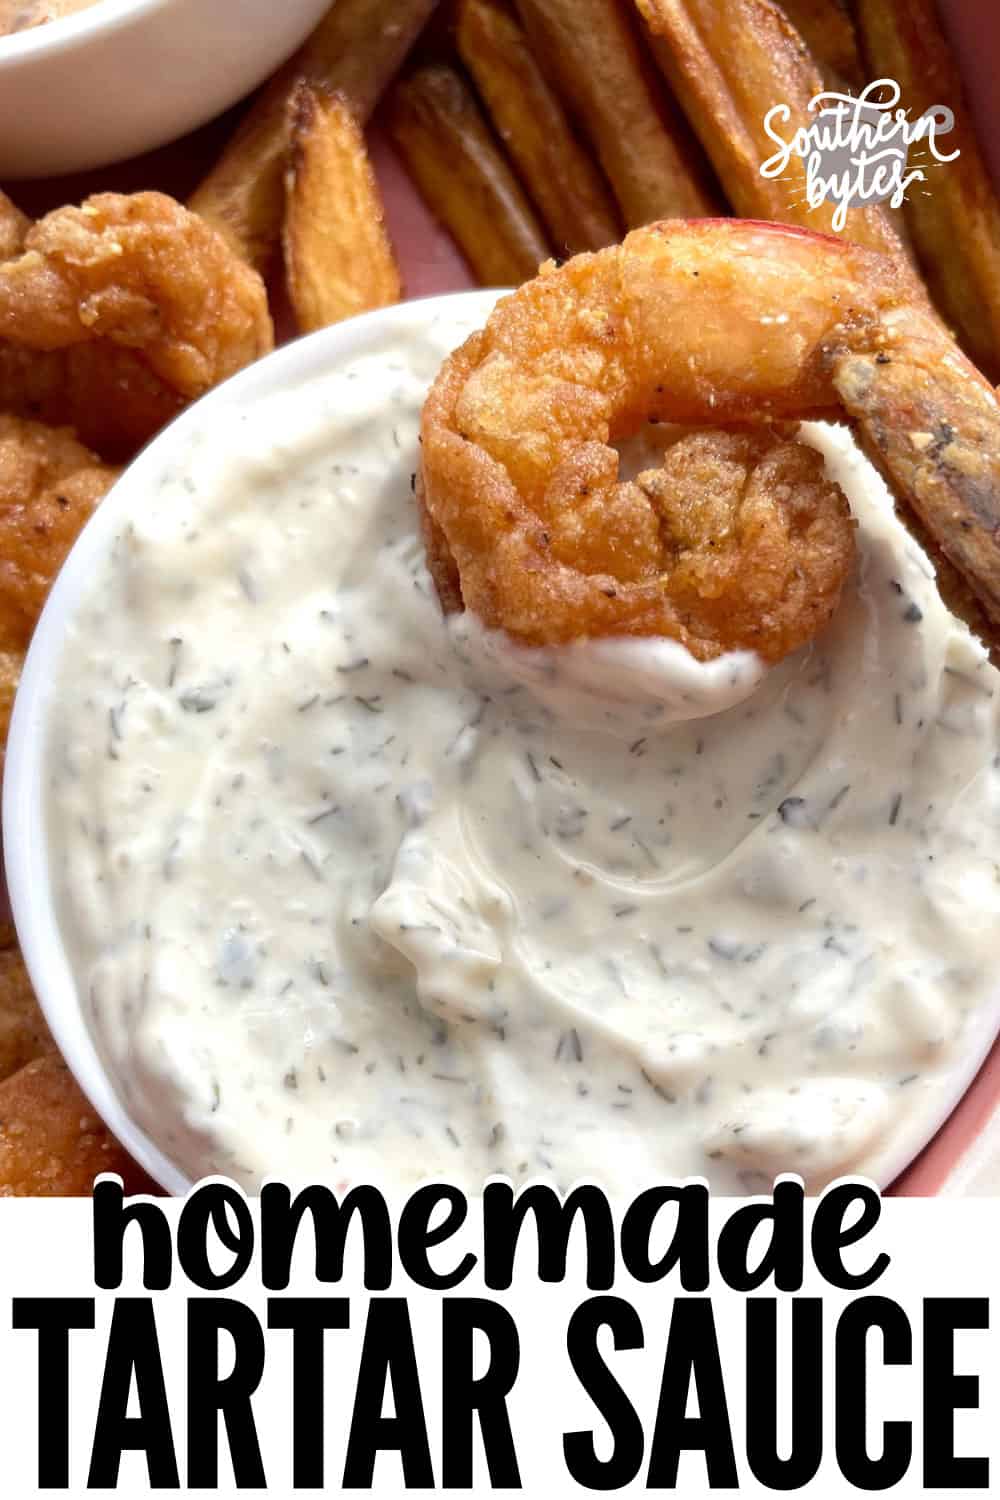 A pin image of a bowl of tartar sauce with a fried shrimp in it.